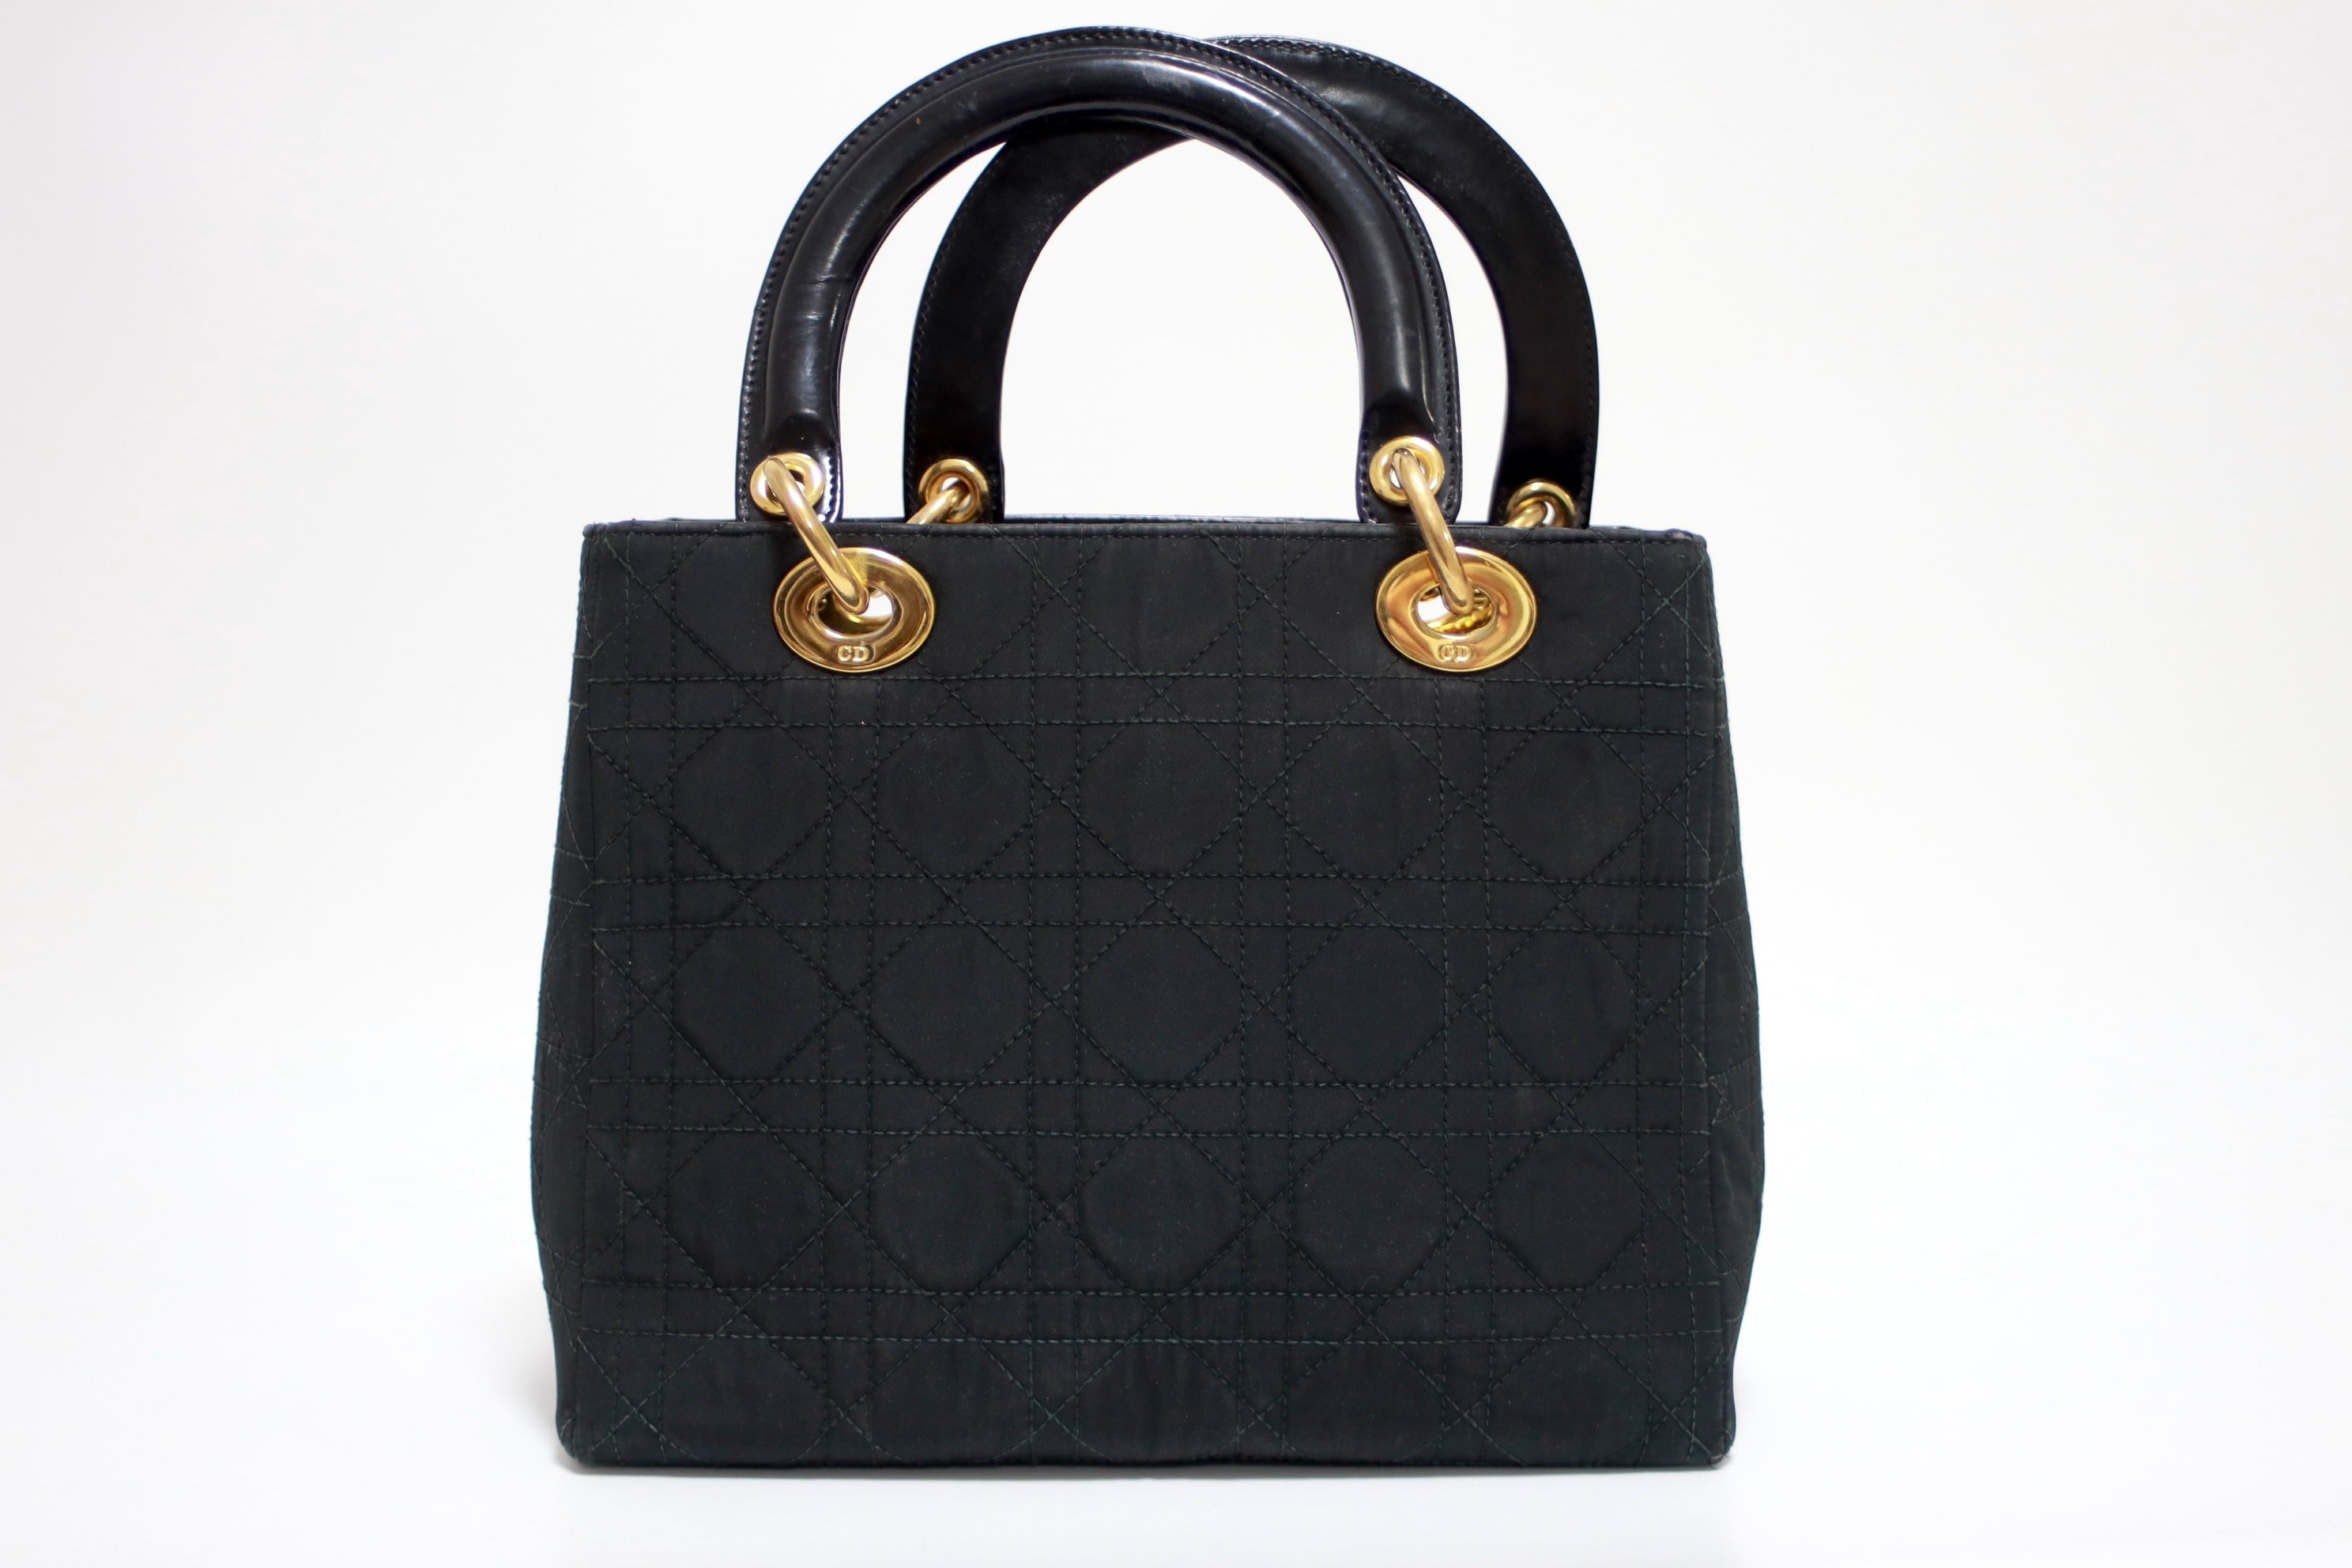 Lady Dior Cannage Quilted/Black Handbag Used (7059)